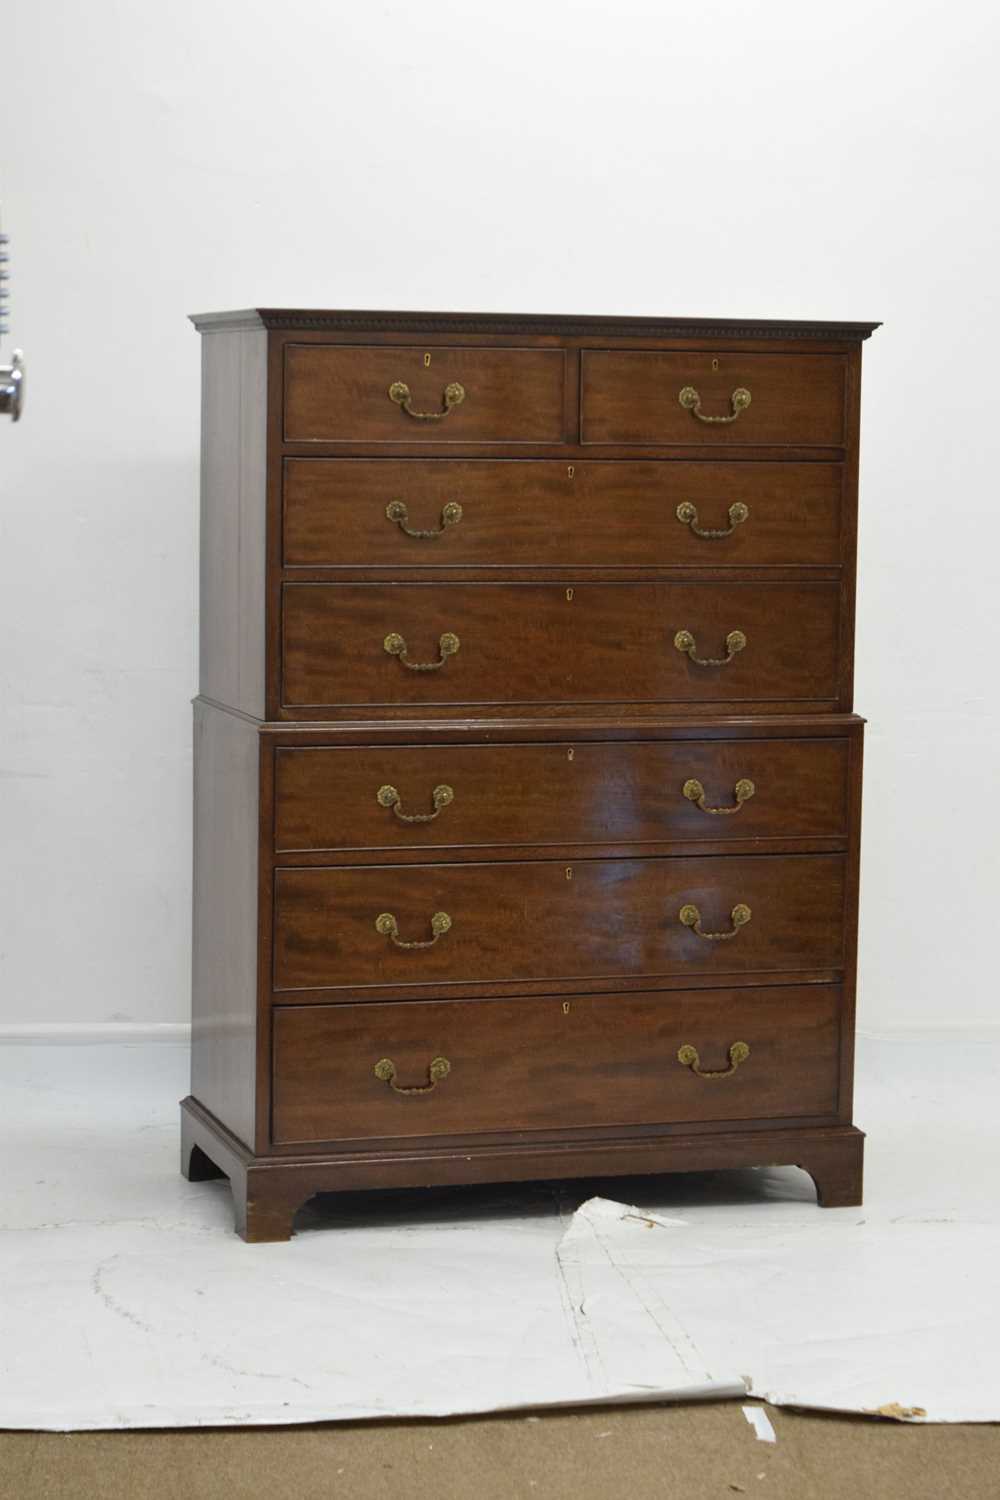 Early 20th century mahogany chest-on-chest or tallboy - Image 2 of 13